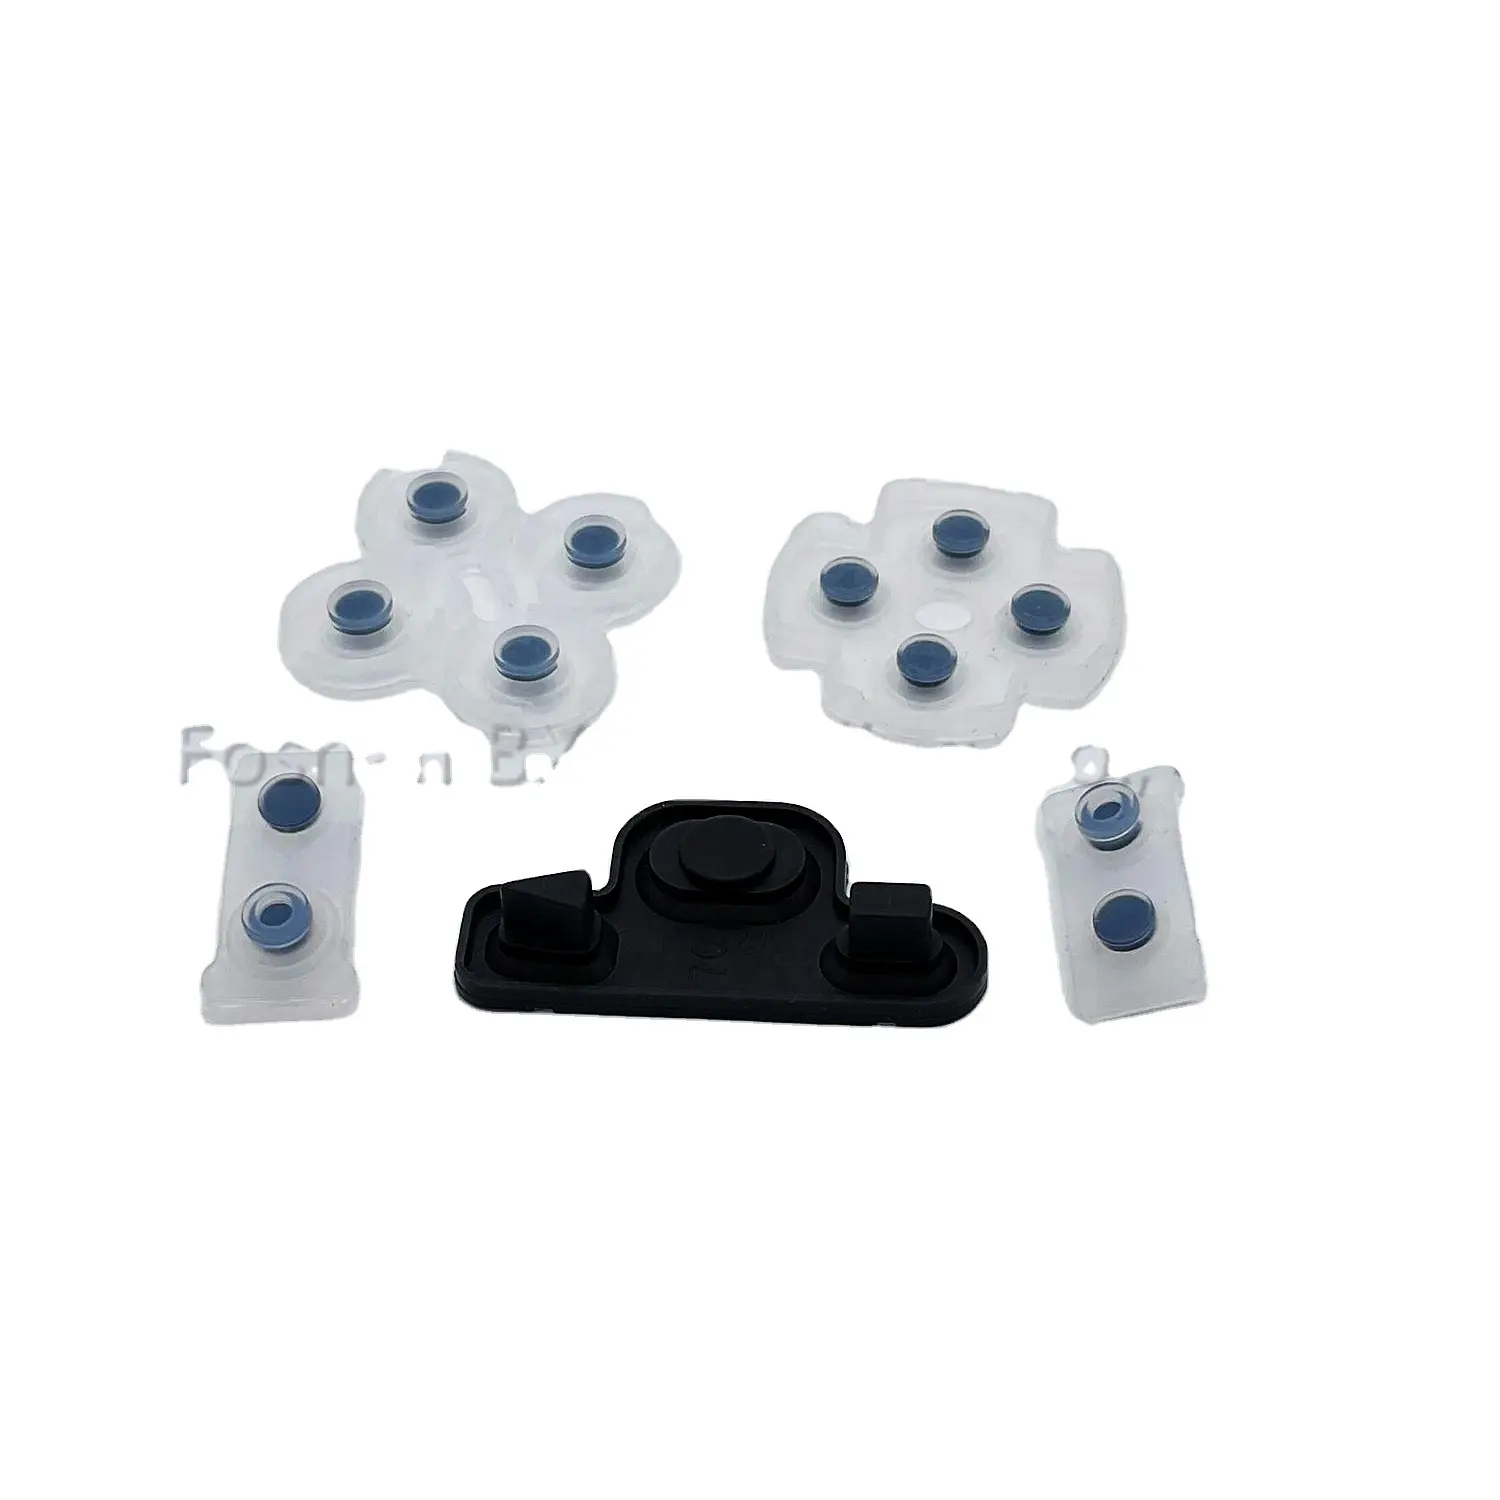 for PS3 Conductive Rubber Pad Button for PS3 controller Contact Pad Repair Replacement